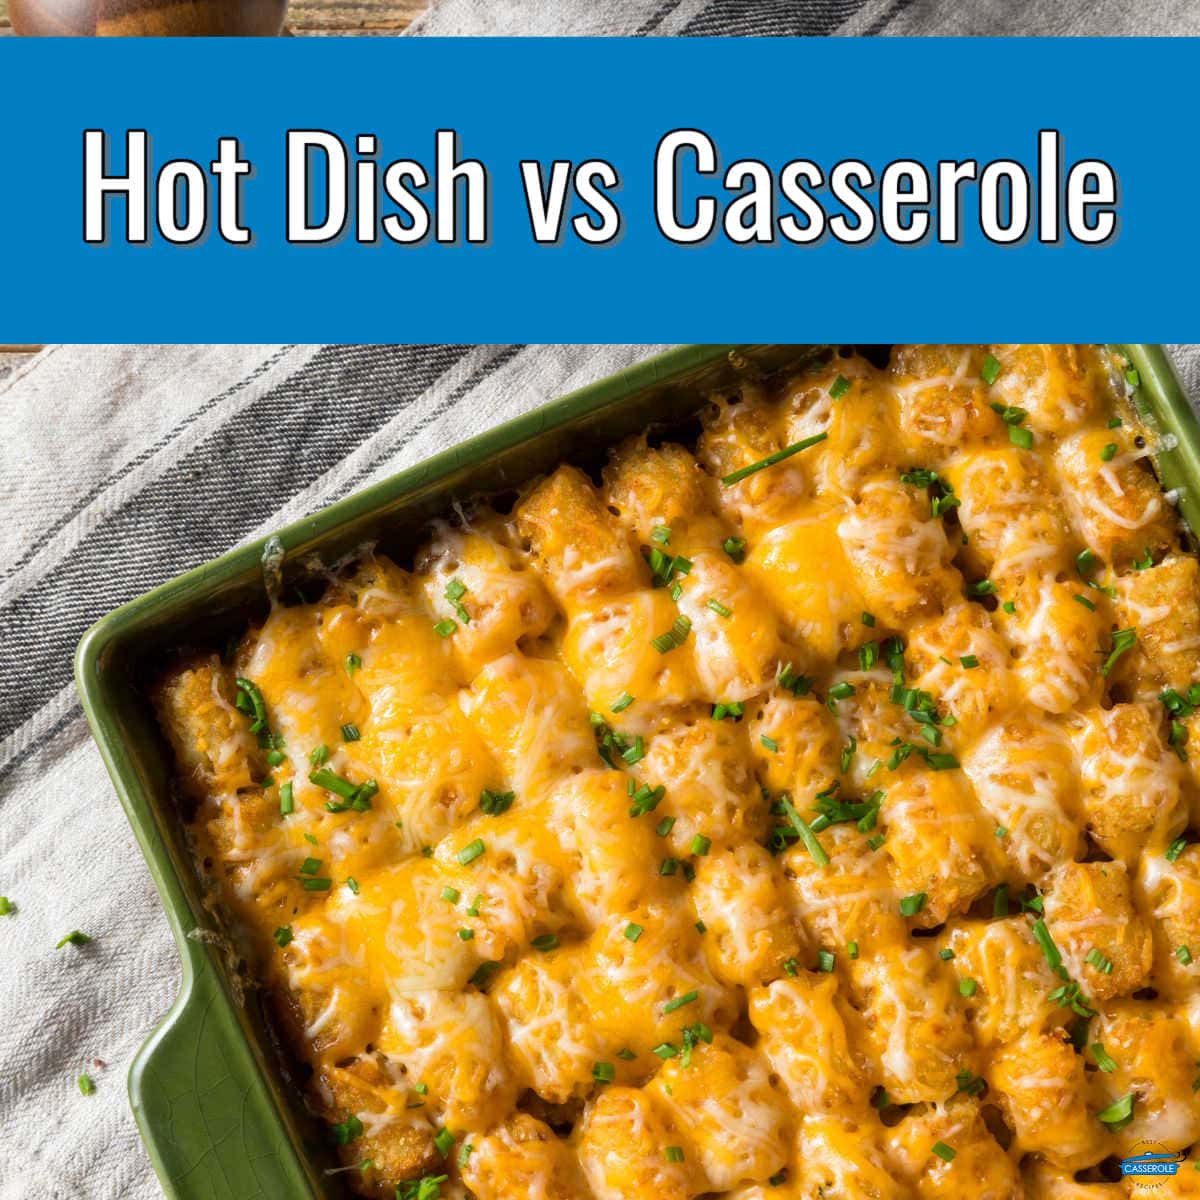 tater tot casserole with blue banner and text "hot dish vs casserole"